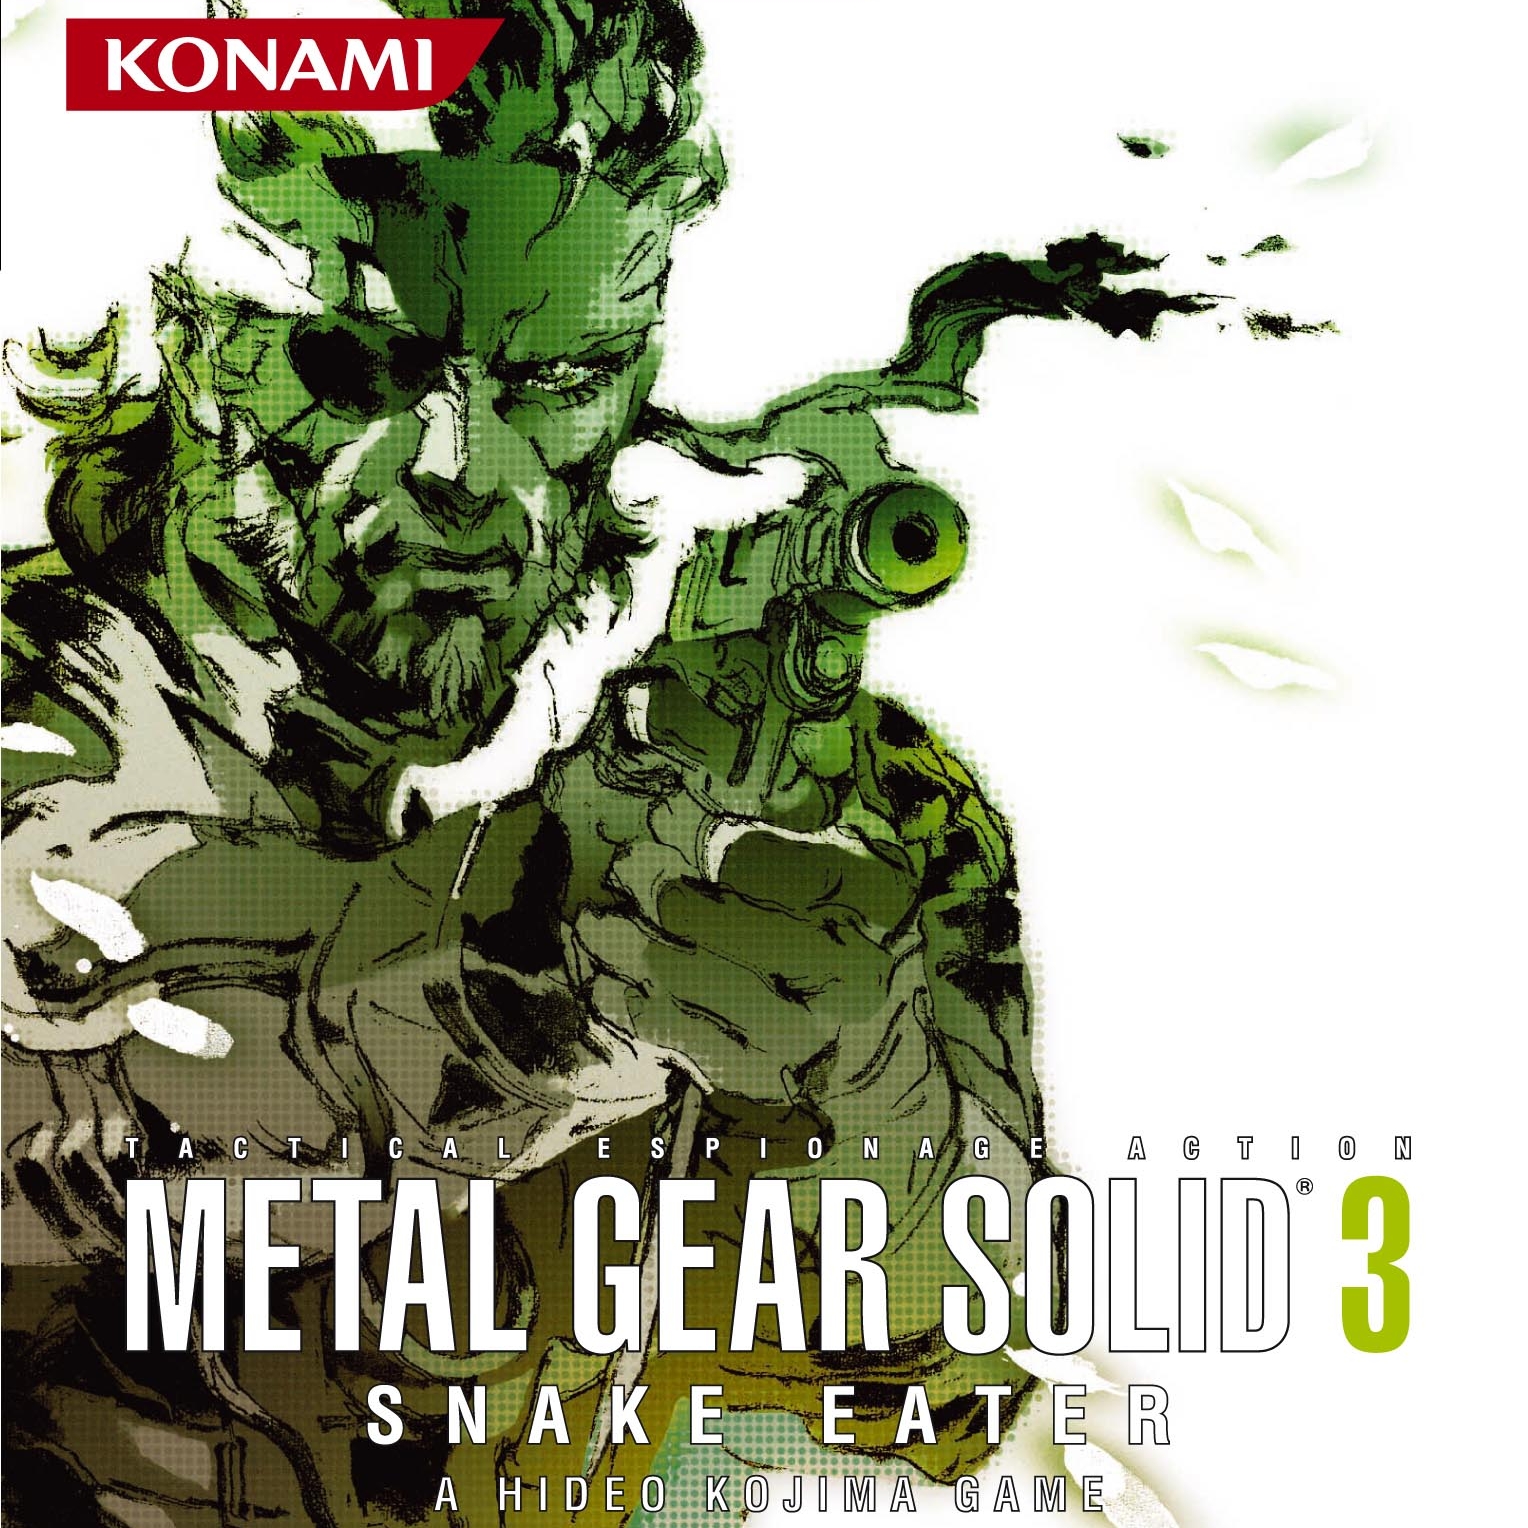 Mgs 3 master collection. Metal Gear Solid 3 Snake Eater. Metal Gear Solid 3 Snake Eater обложка. Metal Gear Solid 3 logo. MGS 3 Cover.